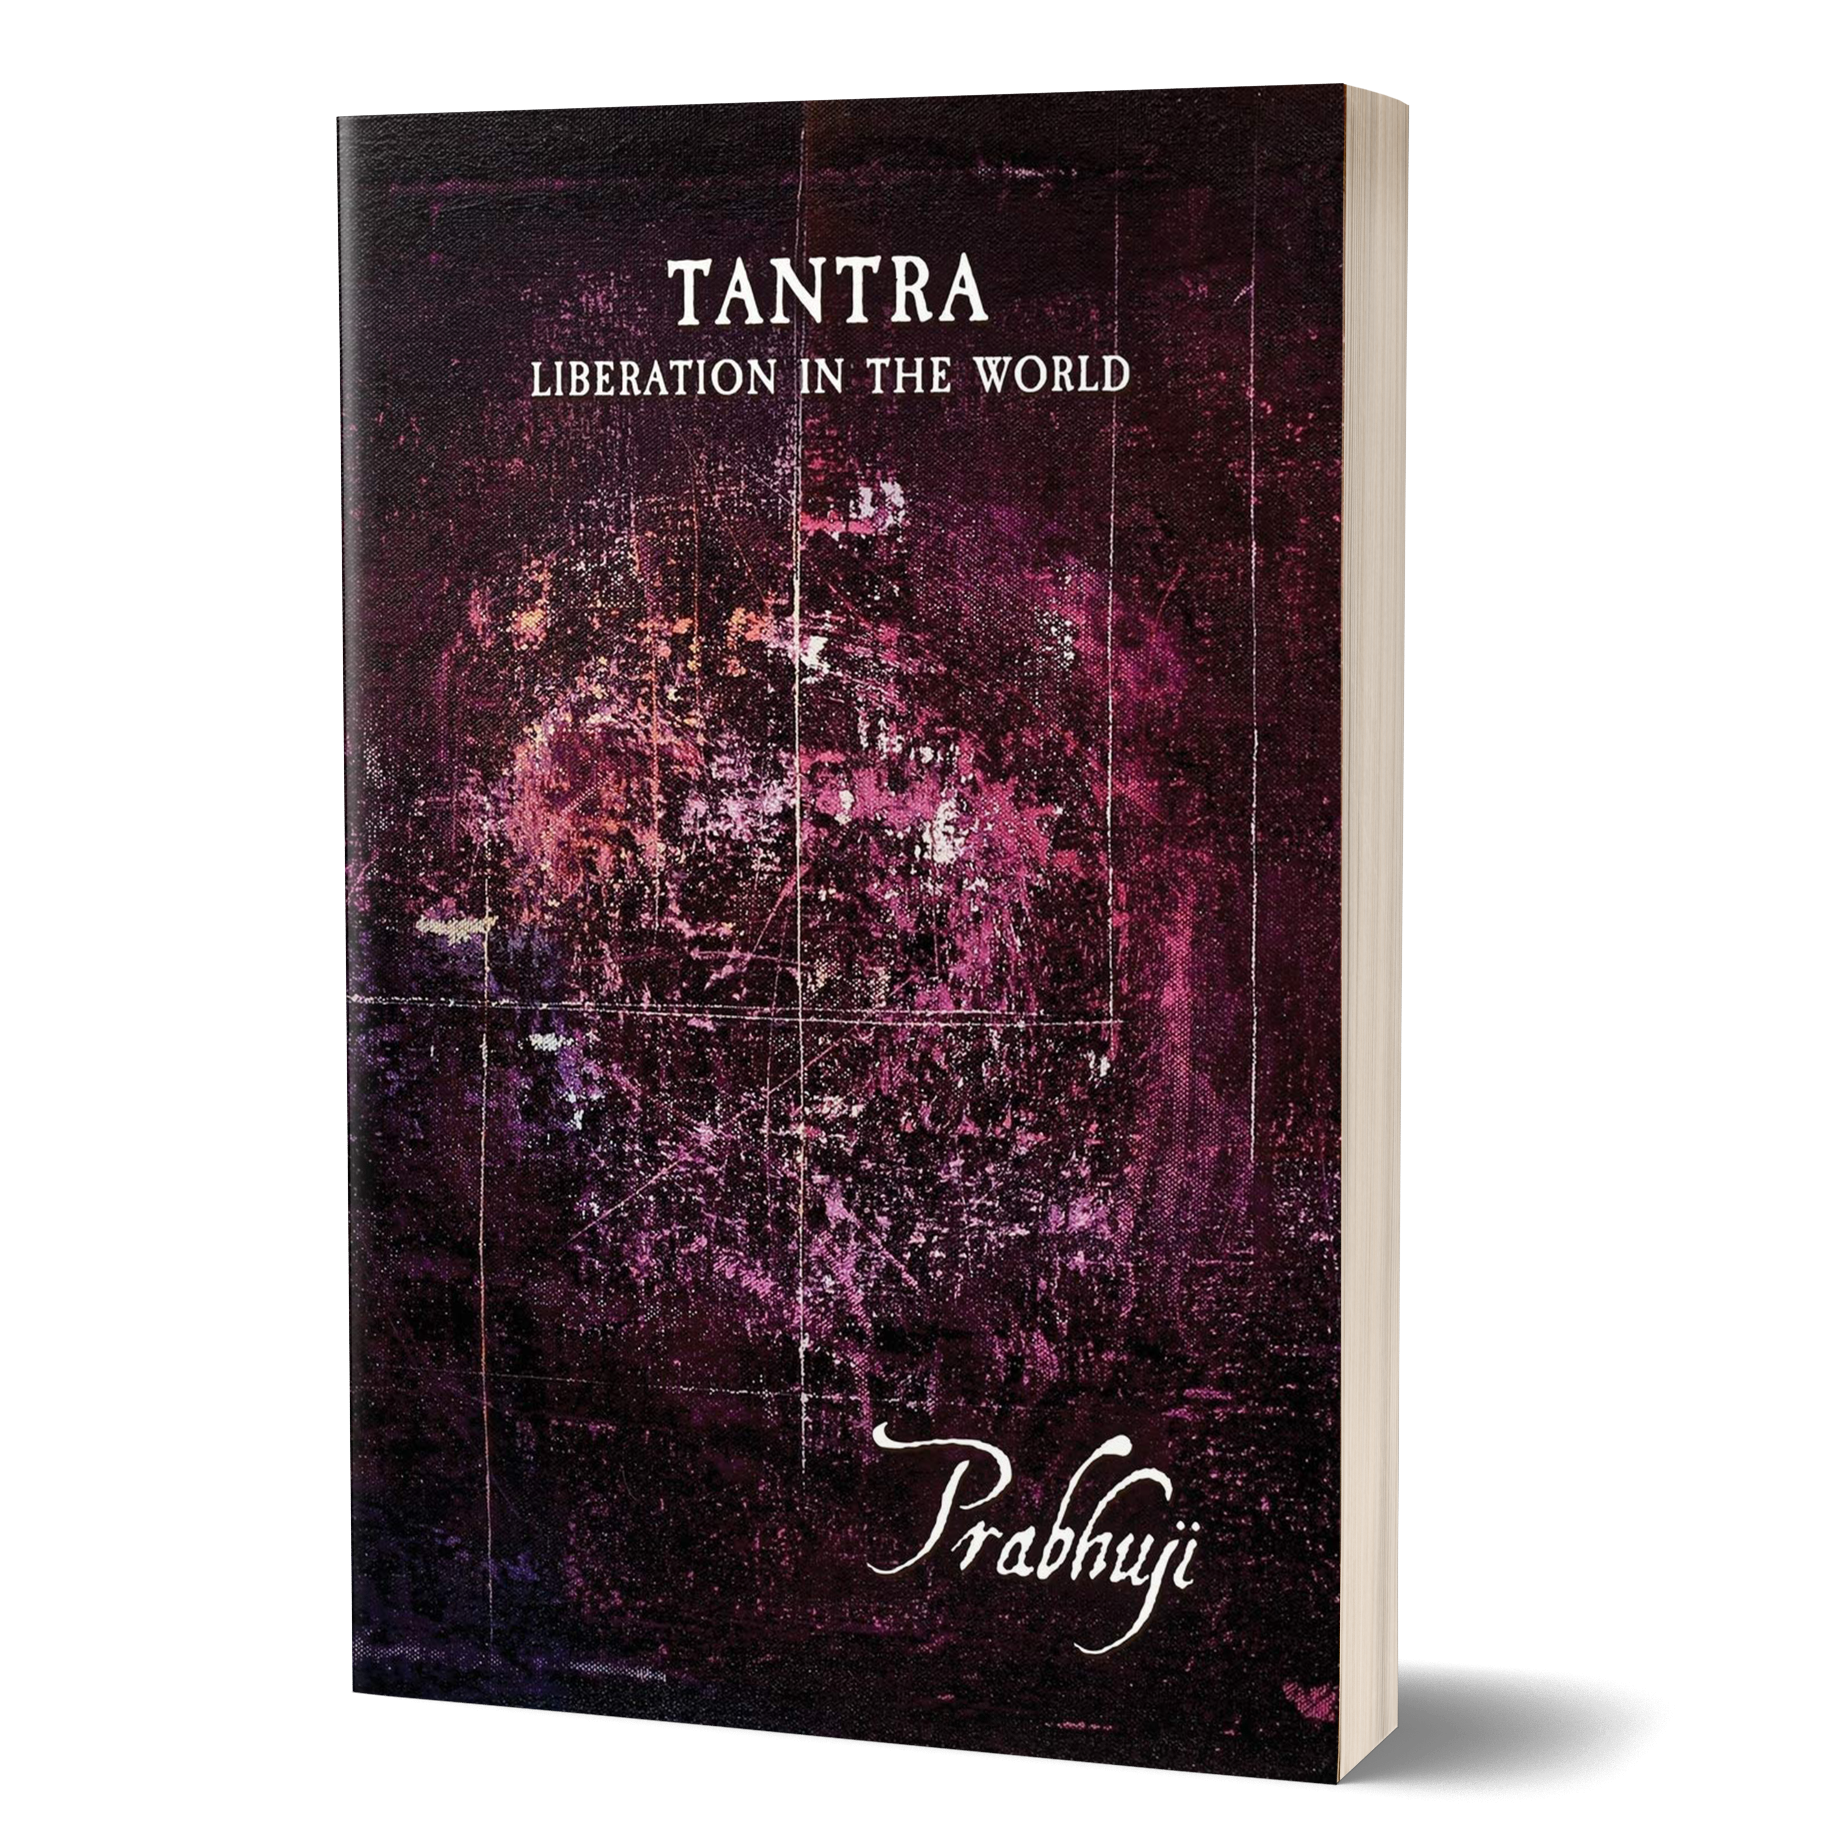 Tantra – Liberation in the world